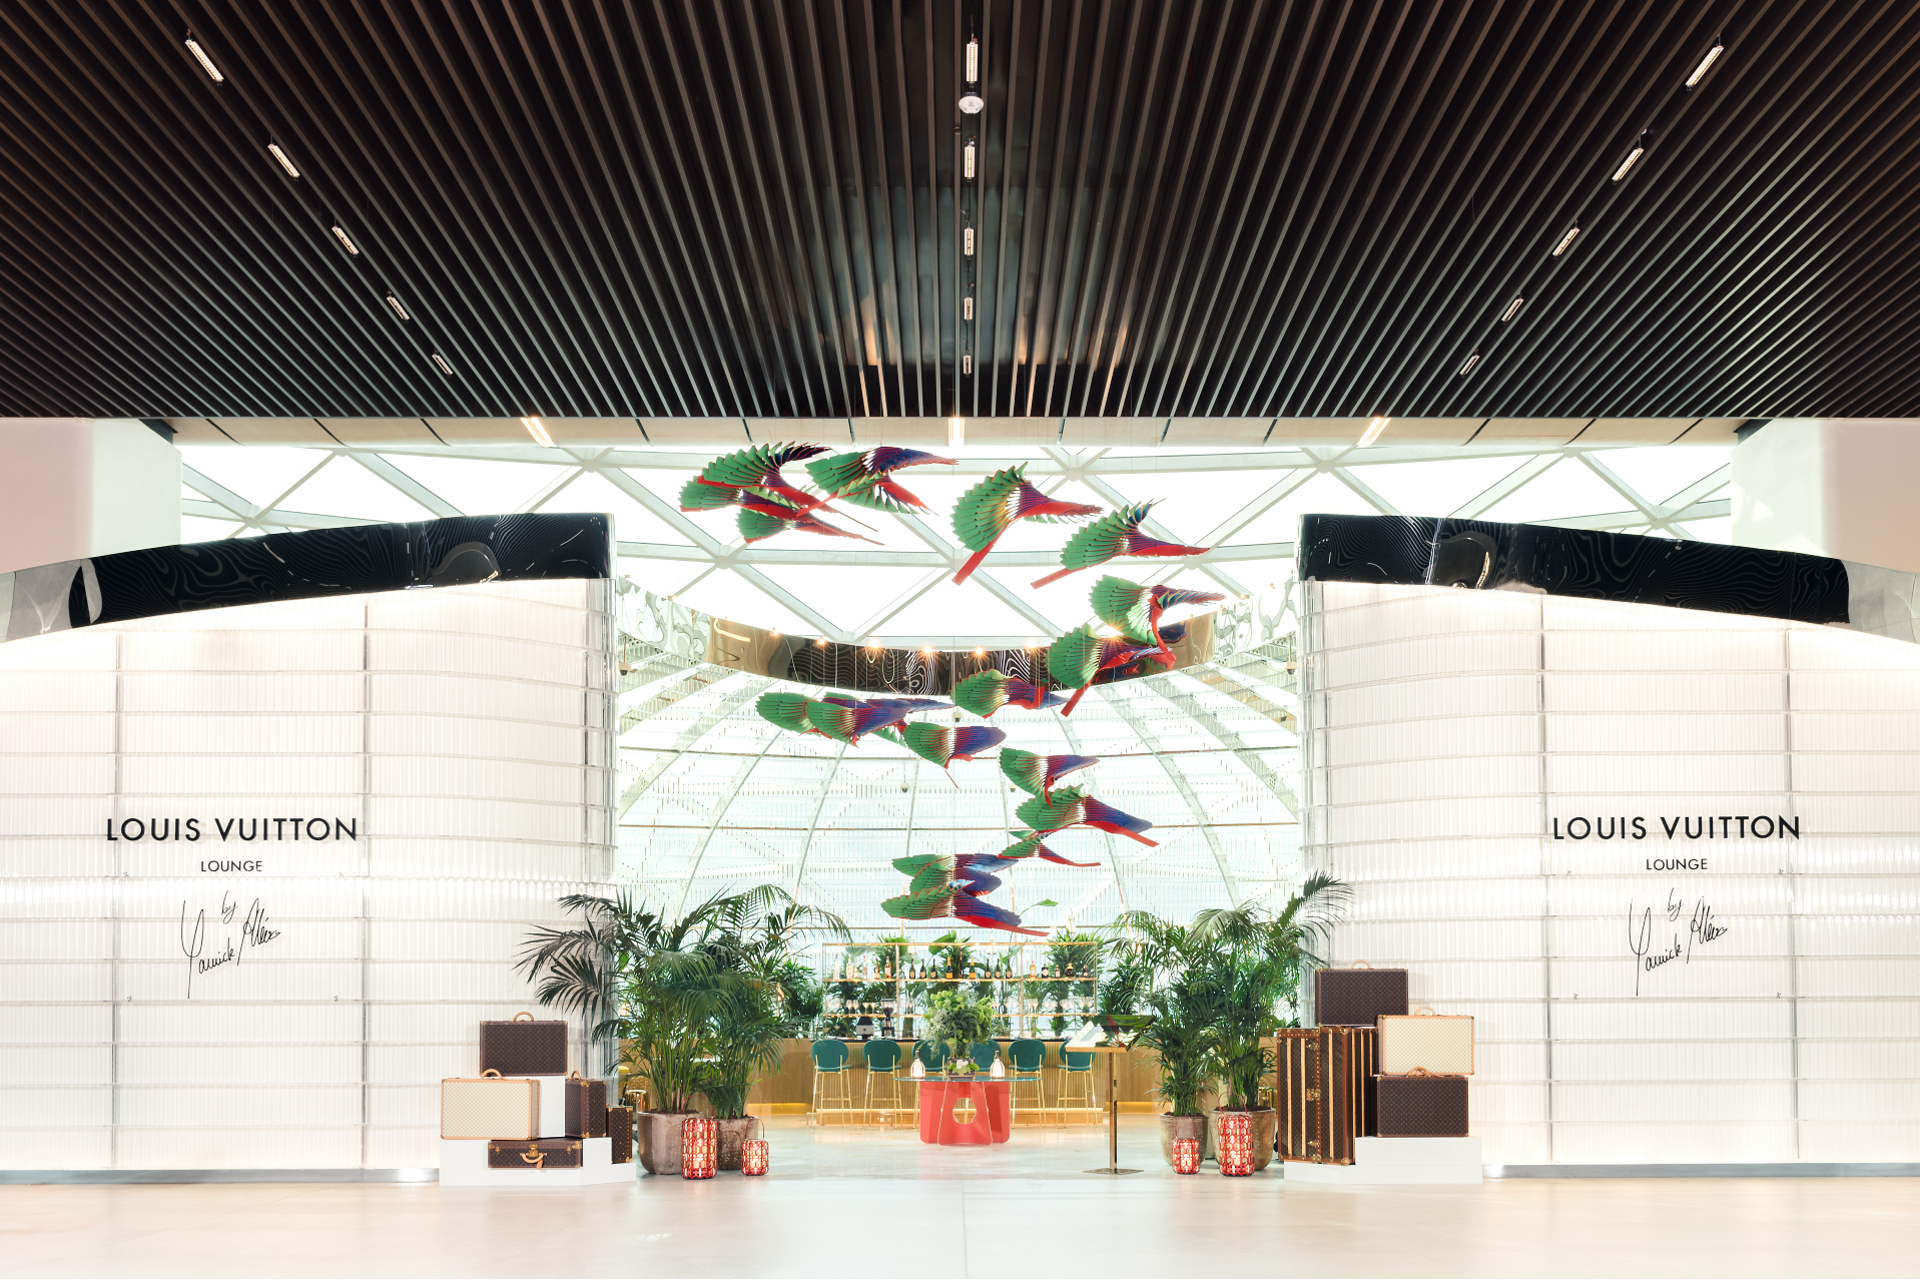 Louis Vuitton latest luxury brand to open store at Sydney Airport